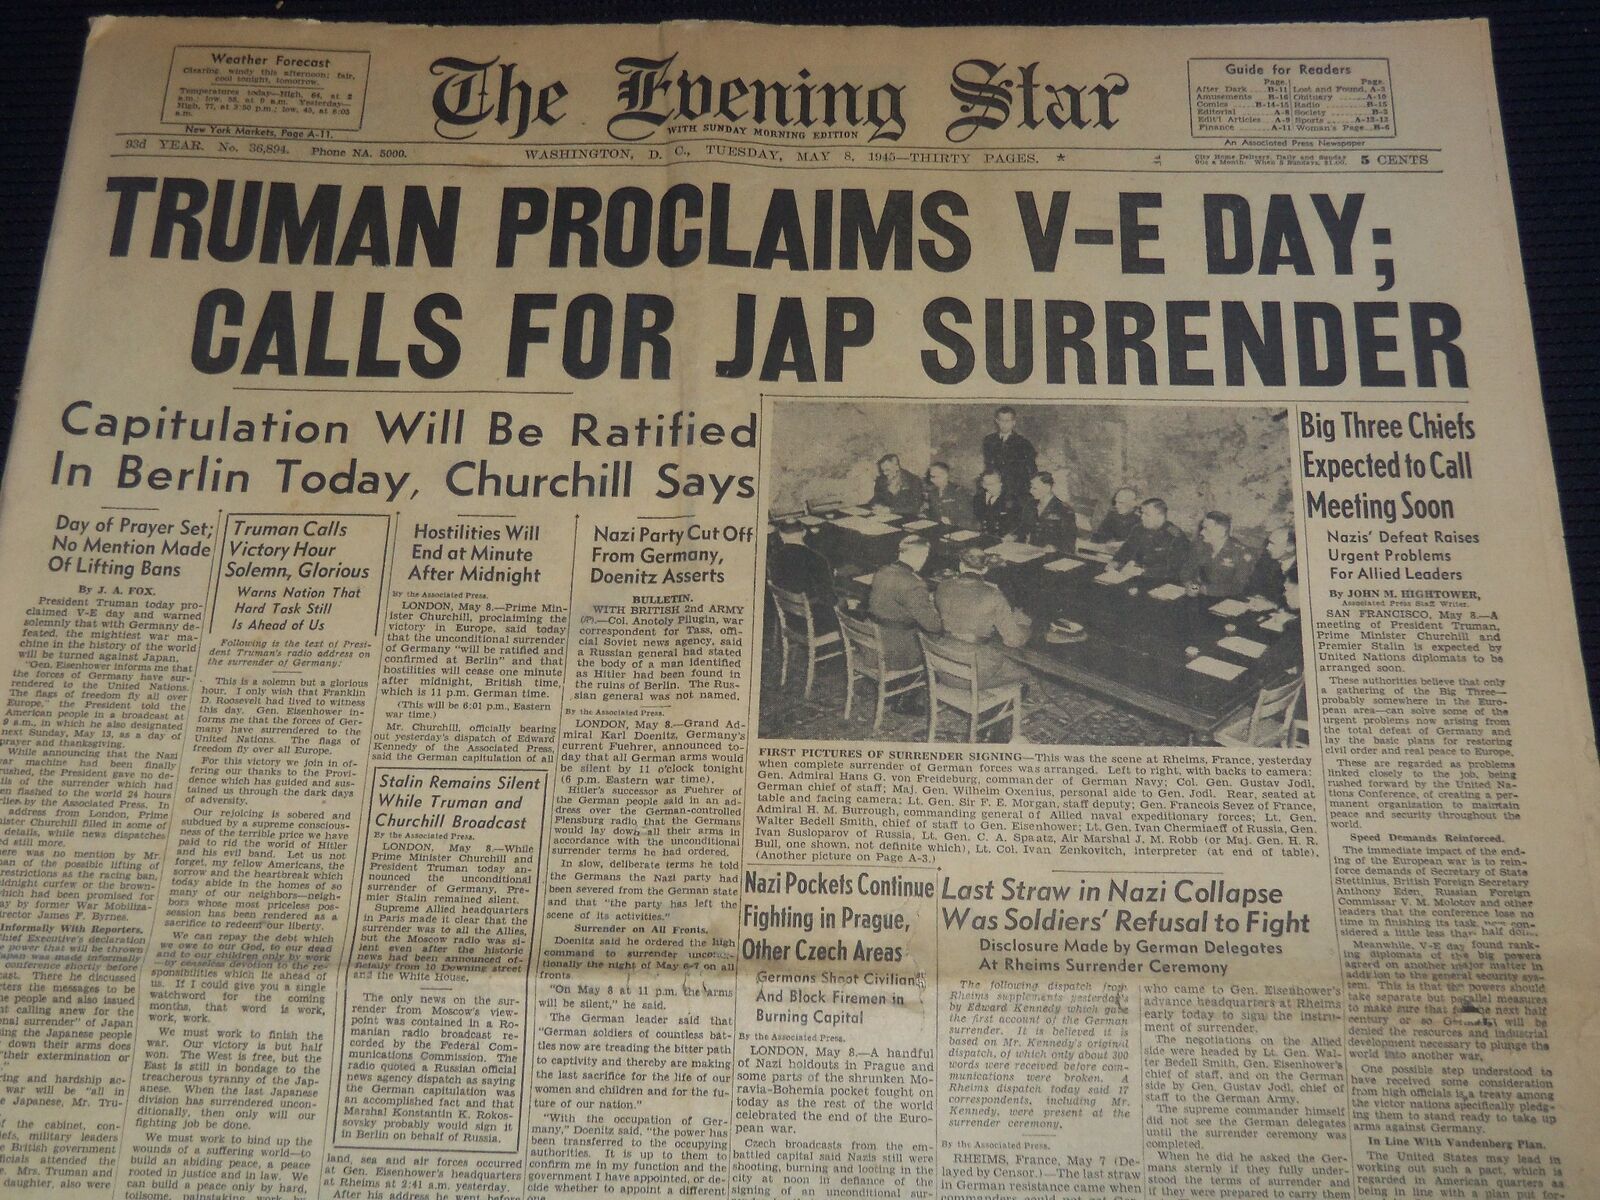 1945 MAY 8 THE EVENING STAR NEWSPAPER - TRUMAN PROCLAIMS - V-E DAY - NT 9457